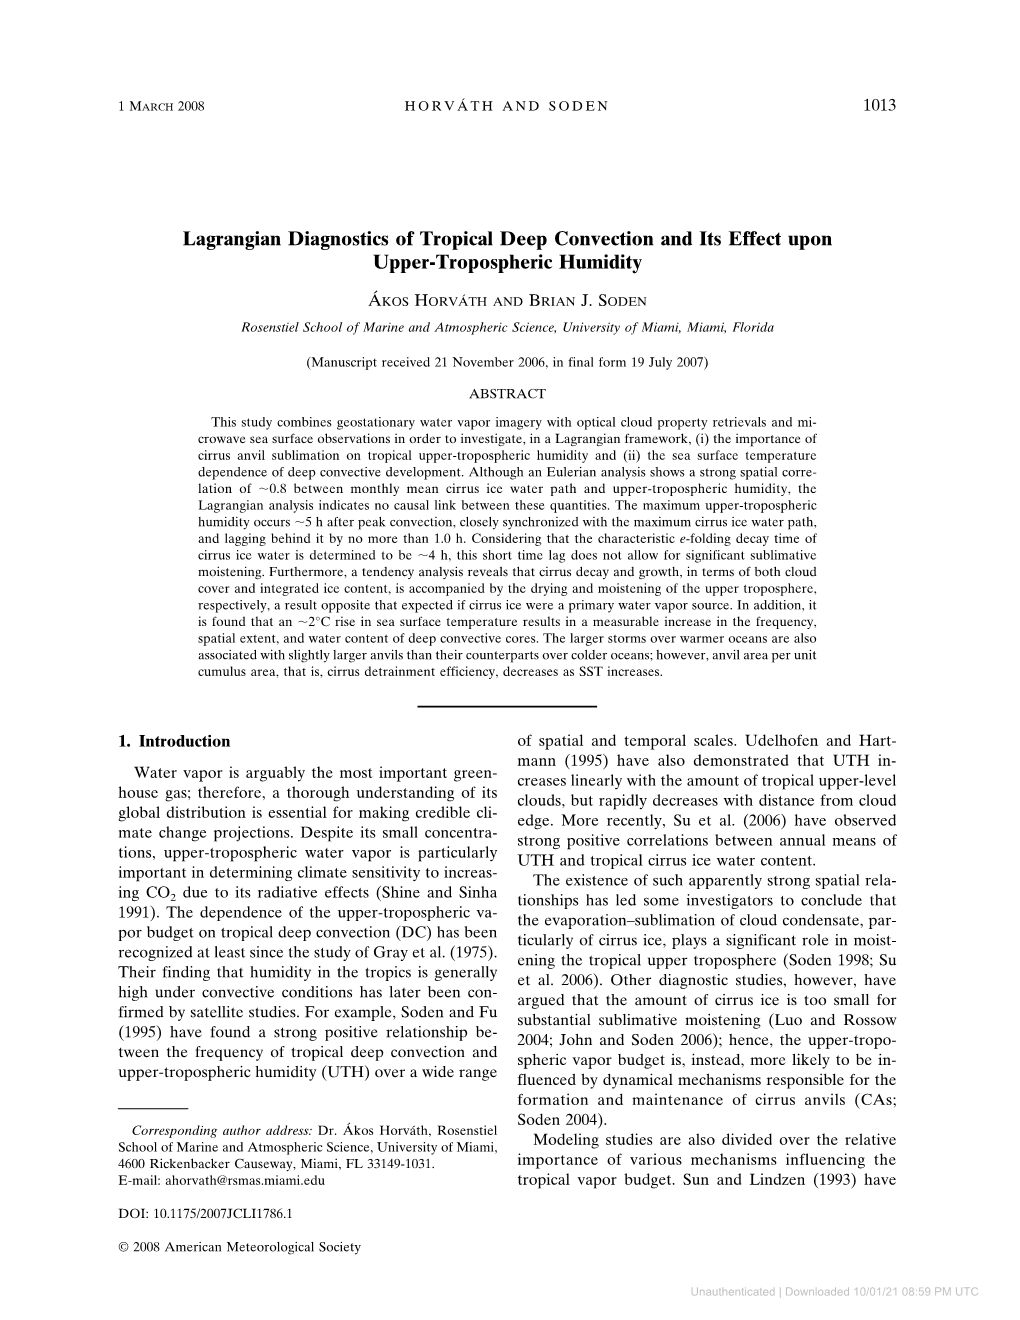 Lagrangian Diagnostics of Tropical Deep Convection and Its Effect Upon Upper-Tropospheric Humidity